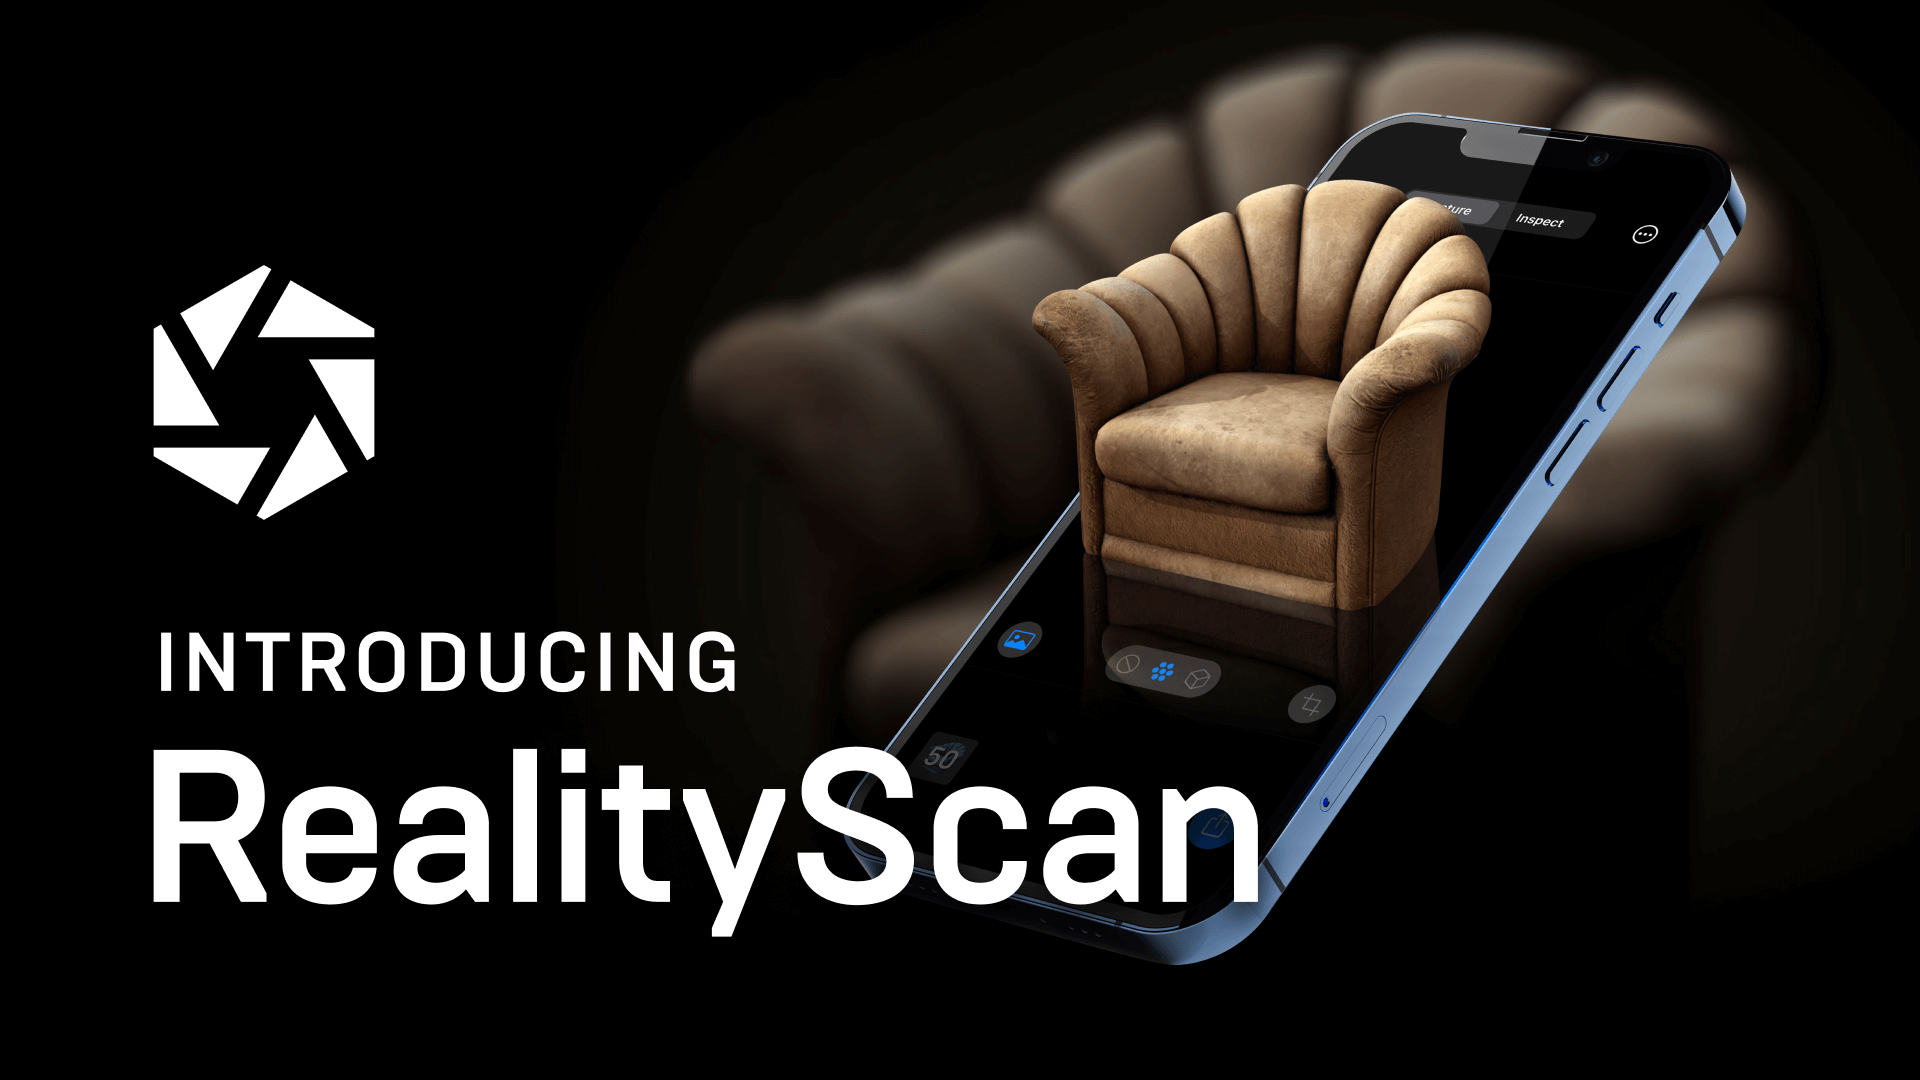 Epic's new RealityScan app converts smartphone images into 3D models